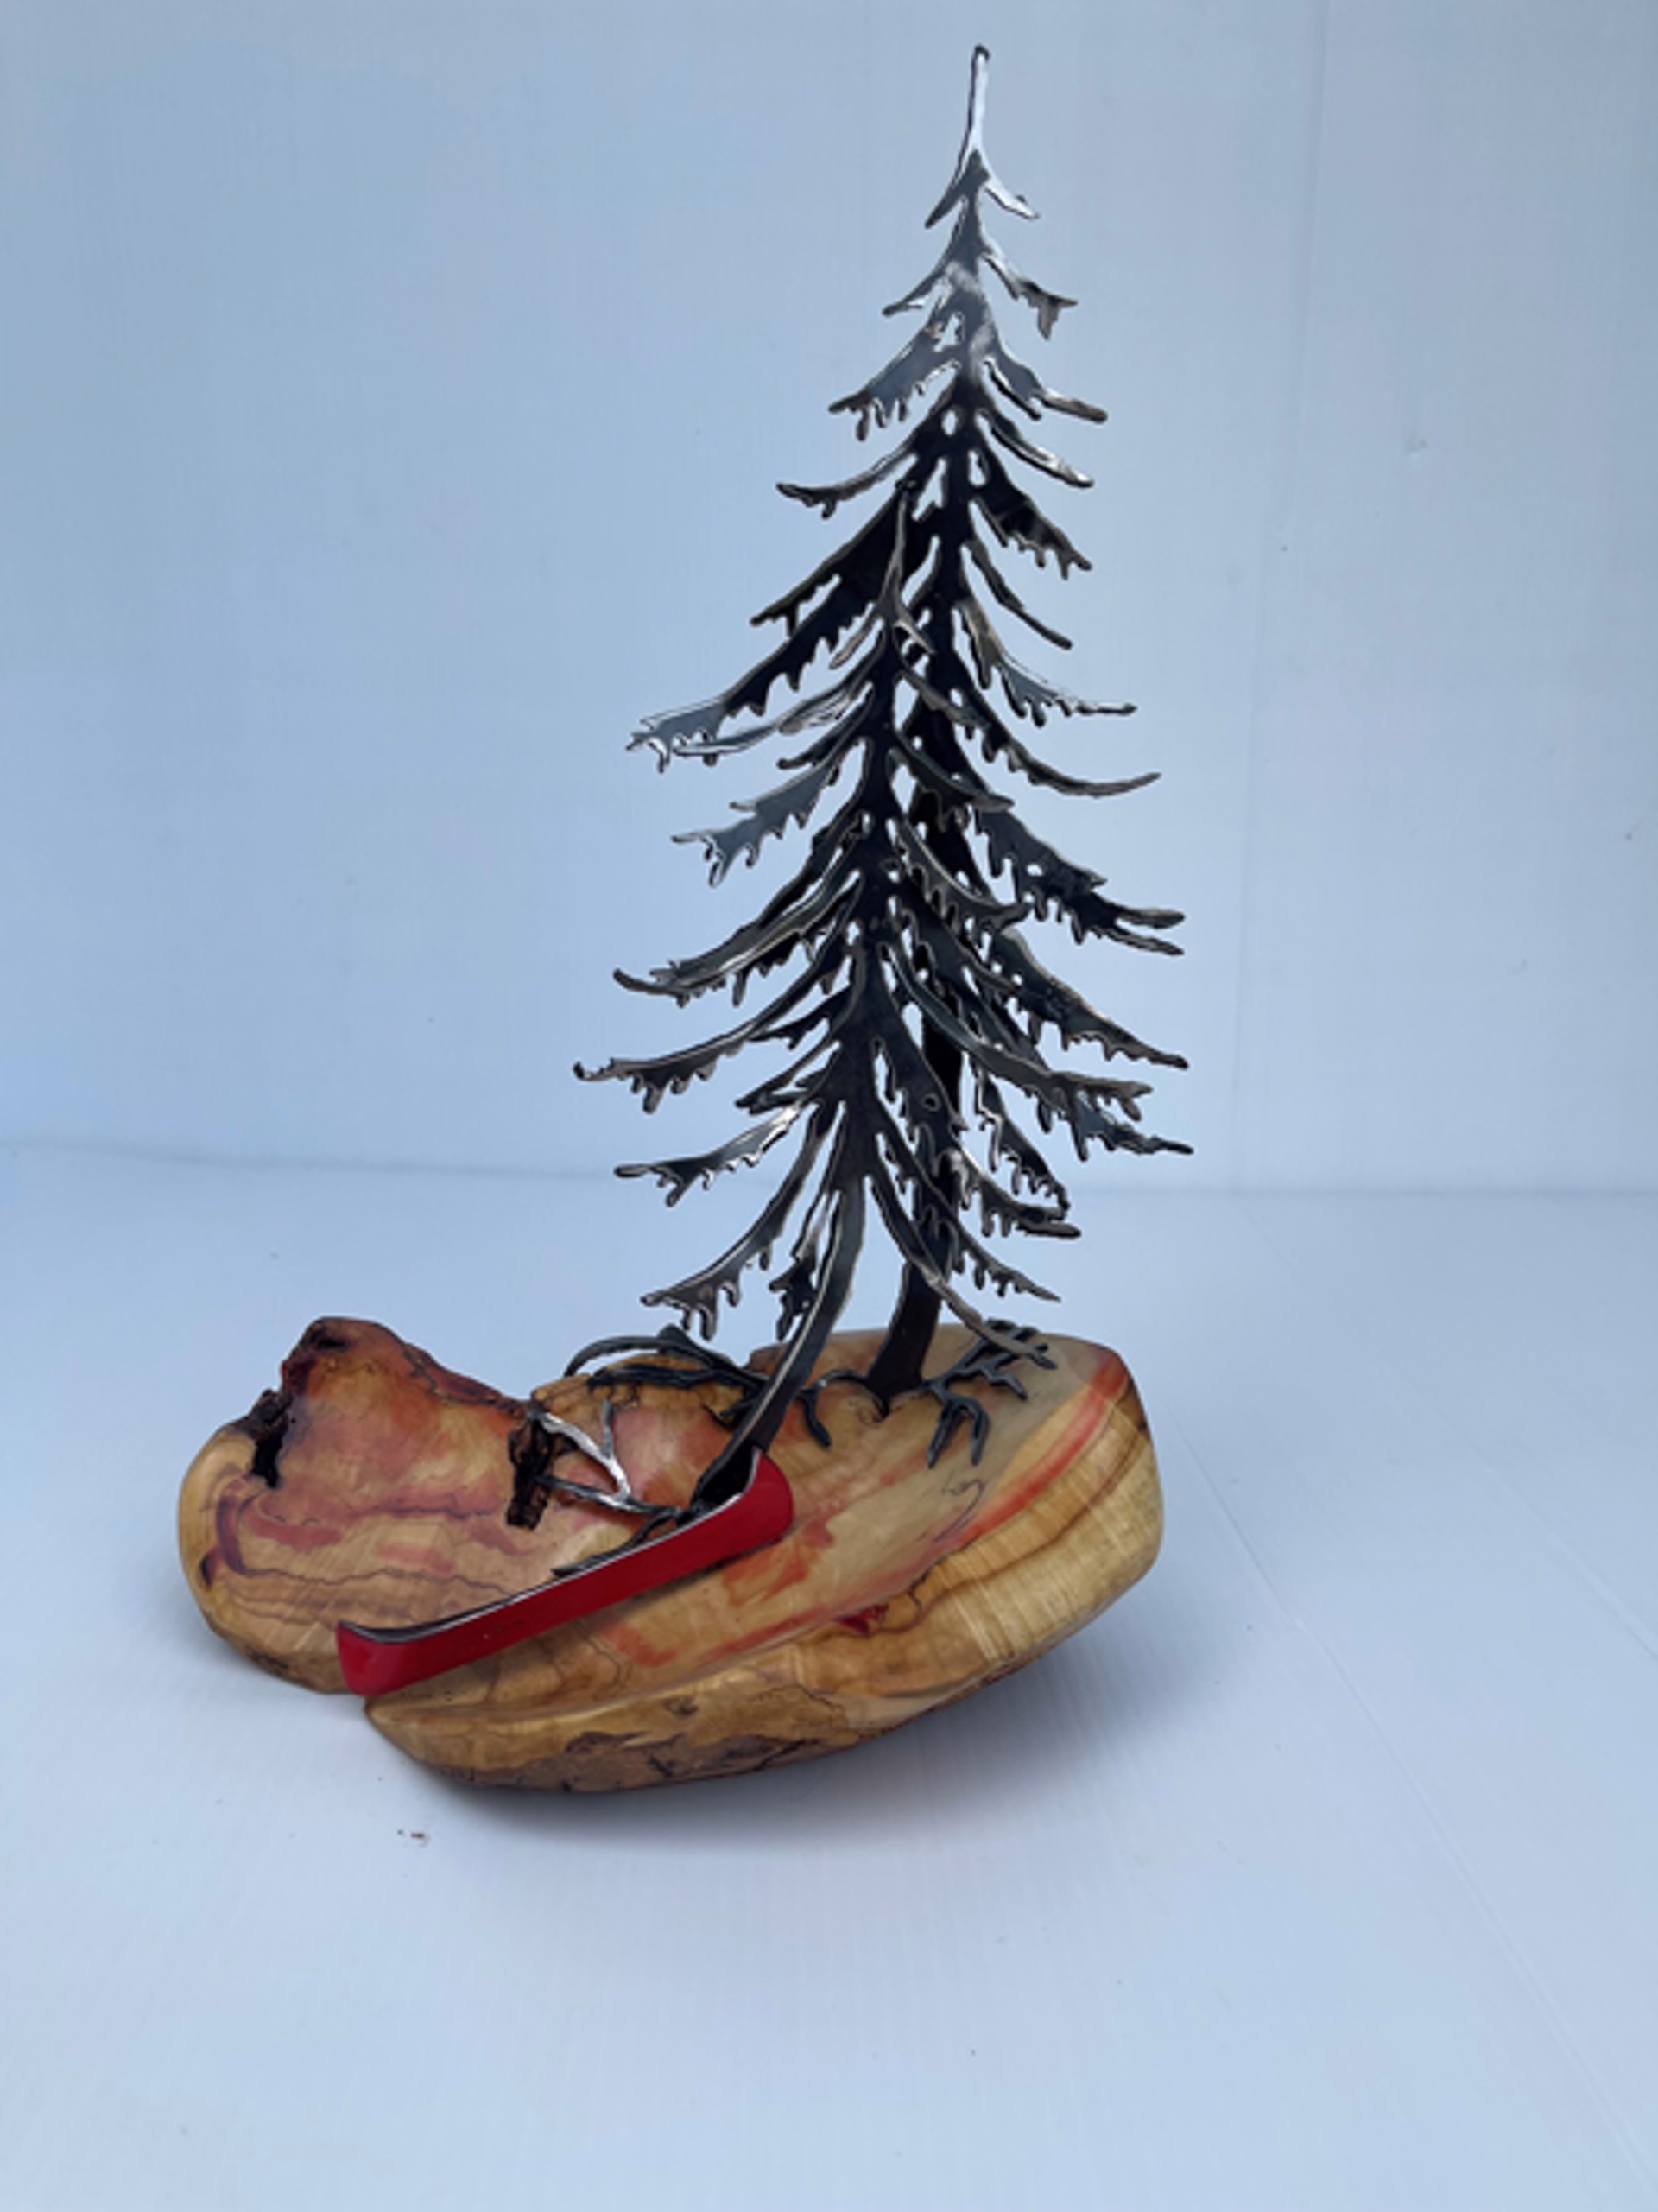 Jack Pines with Red Canoe on Manitoba Maple by Cathy Mark